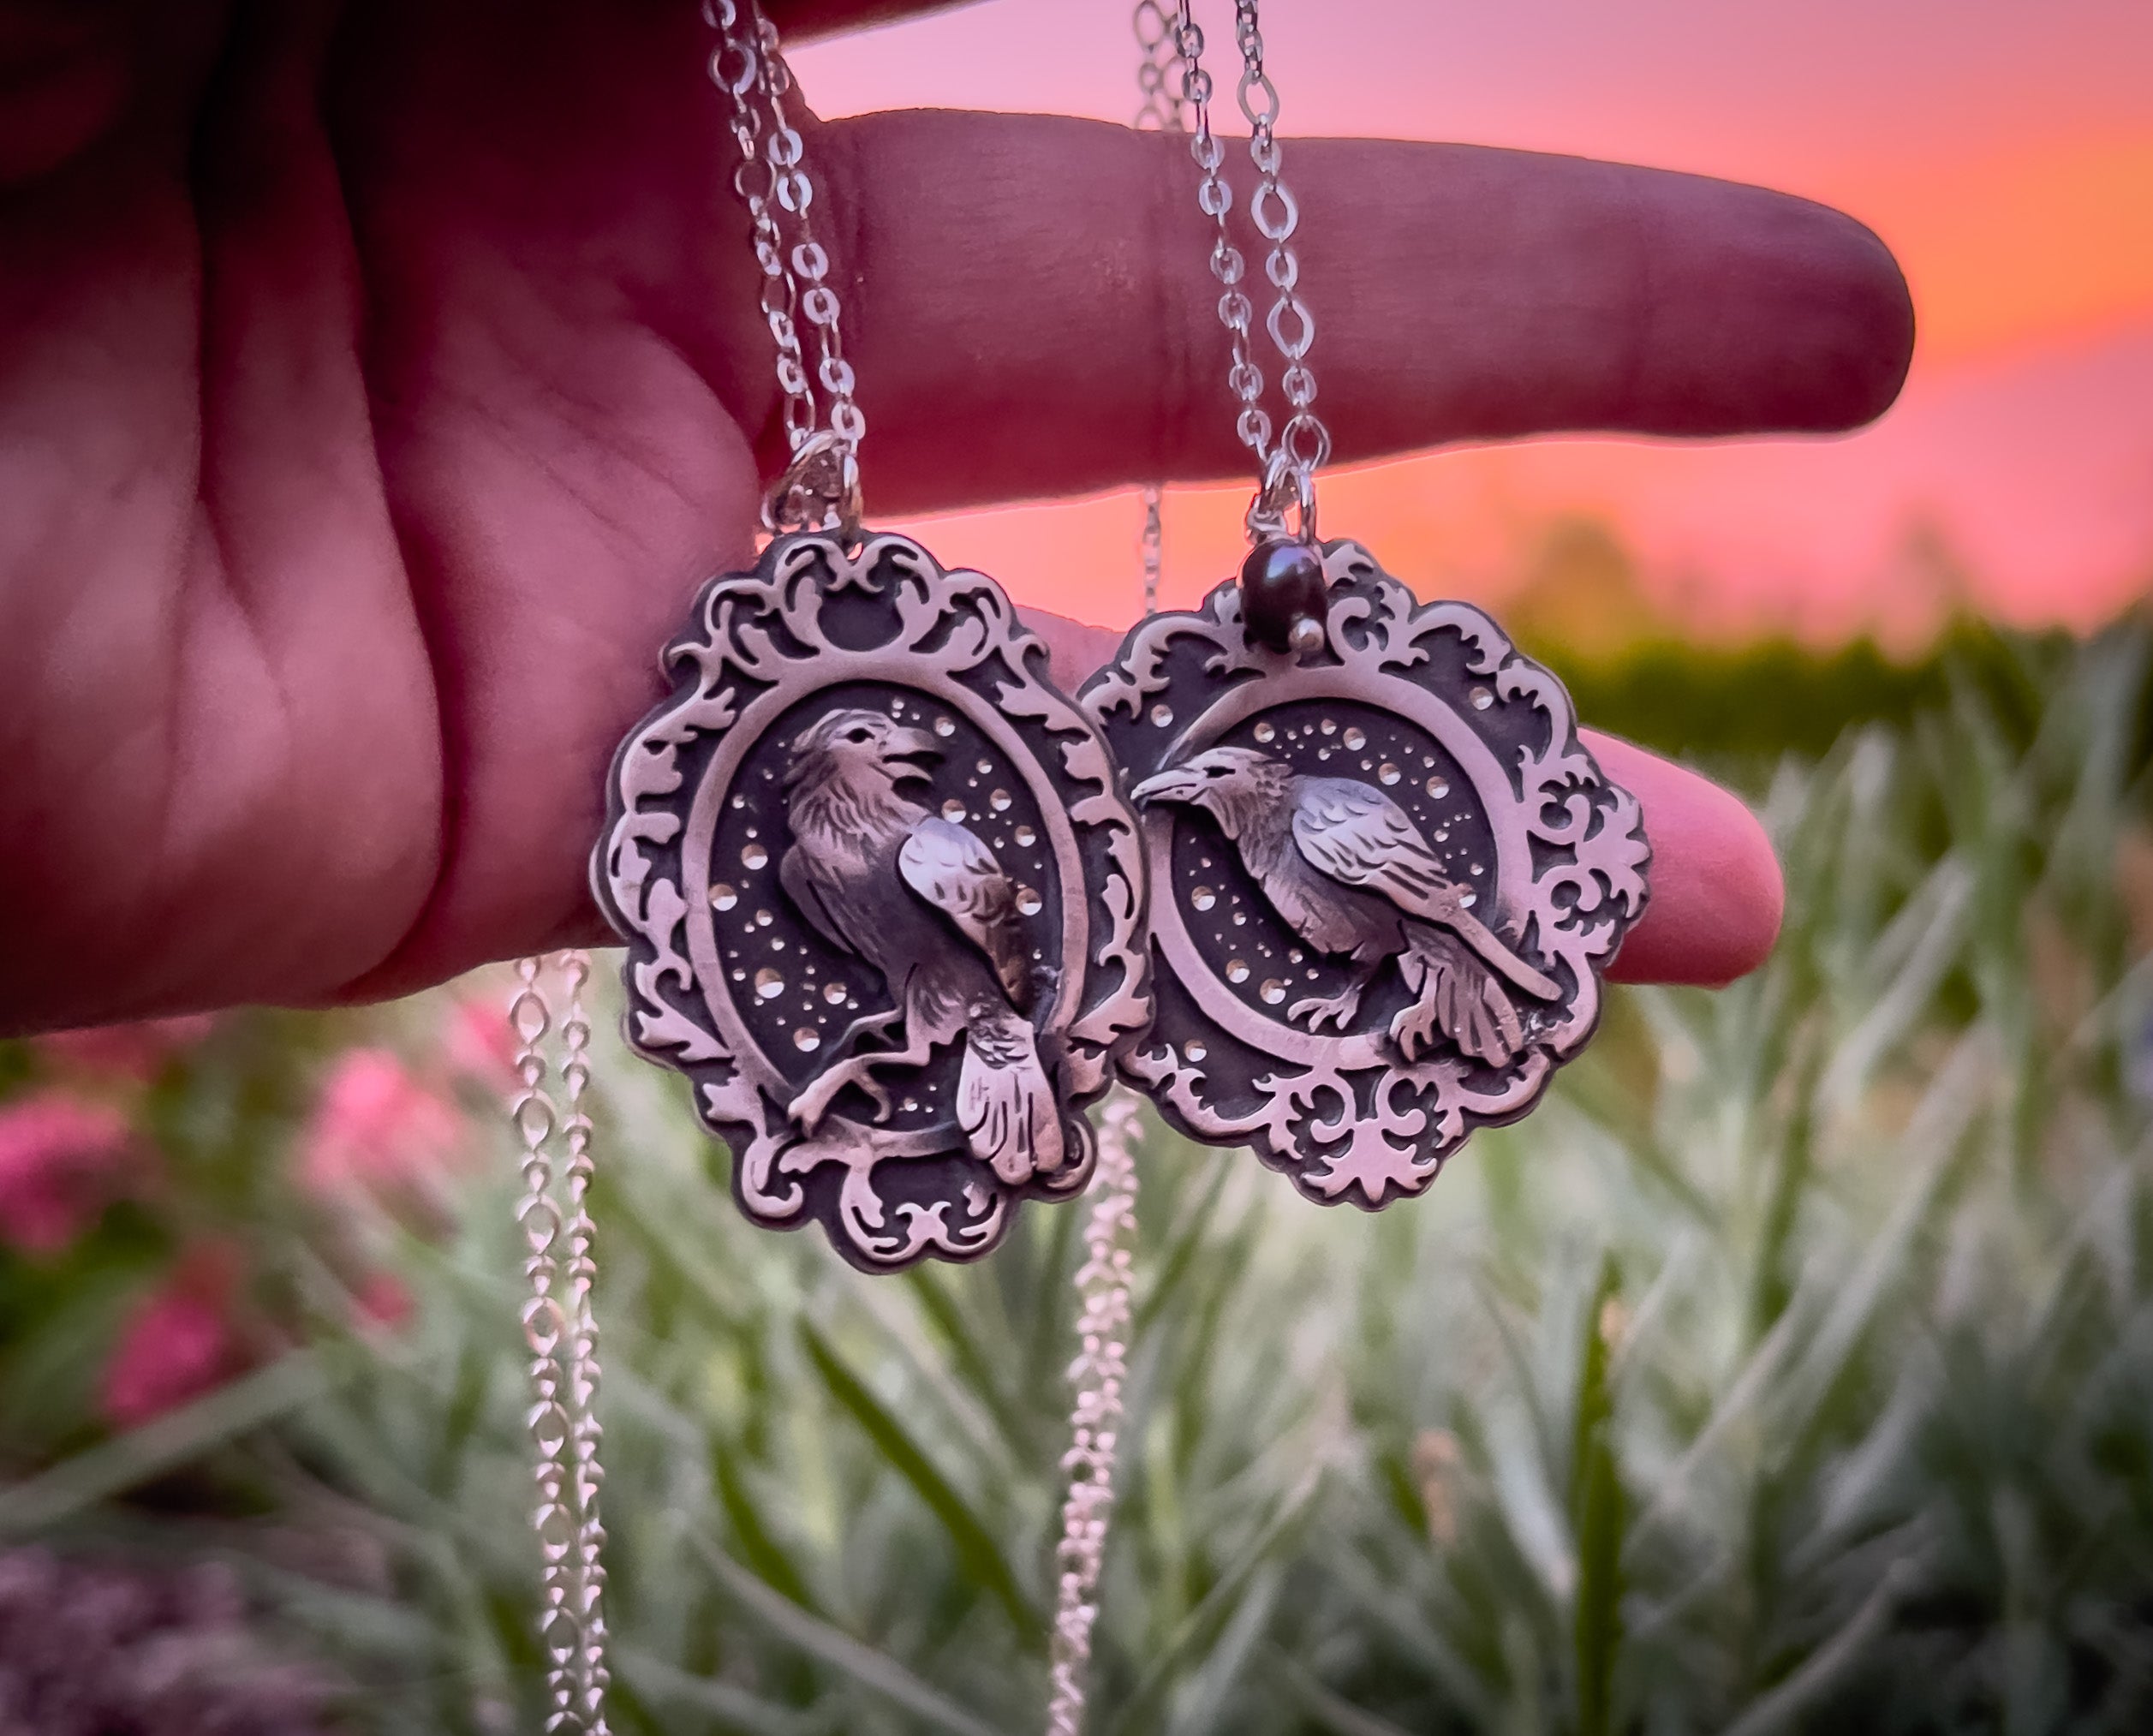 The Royal Raven Necklace